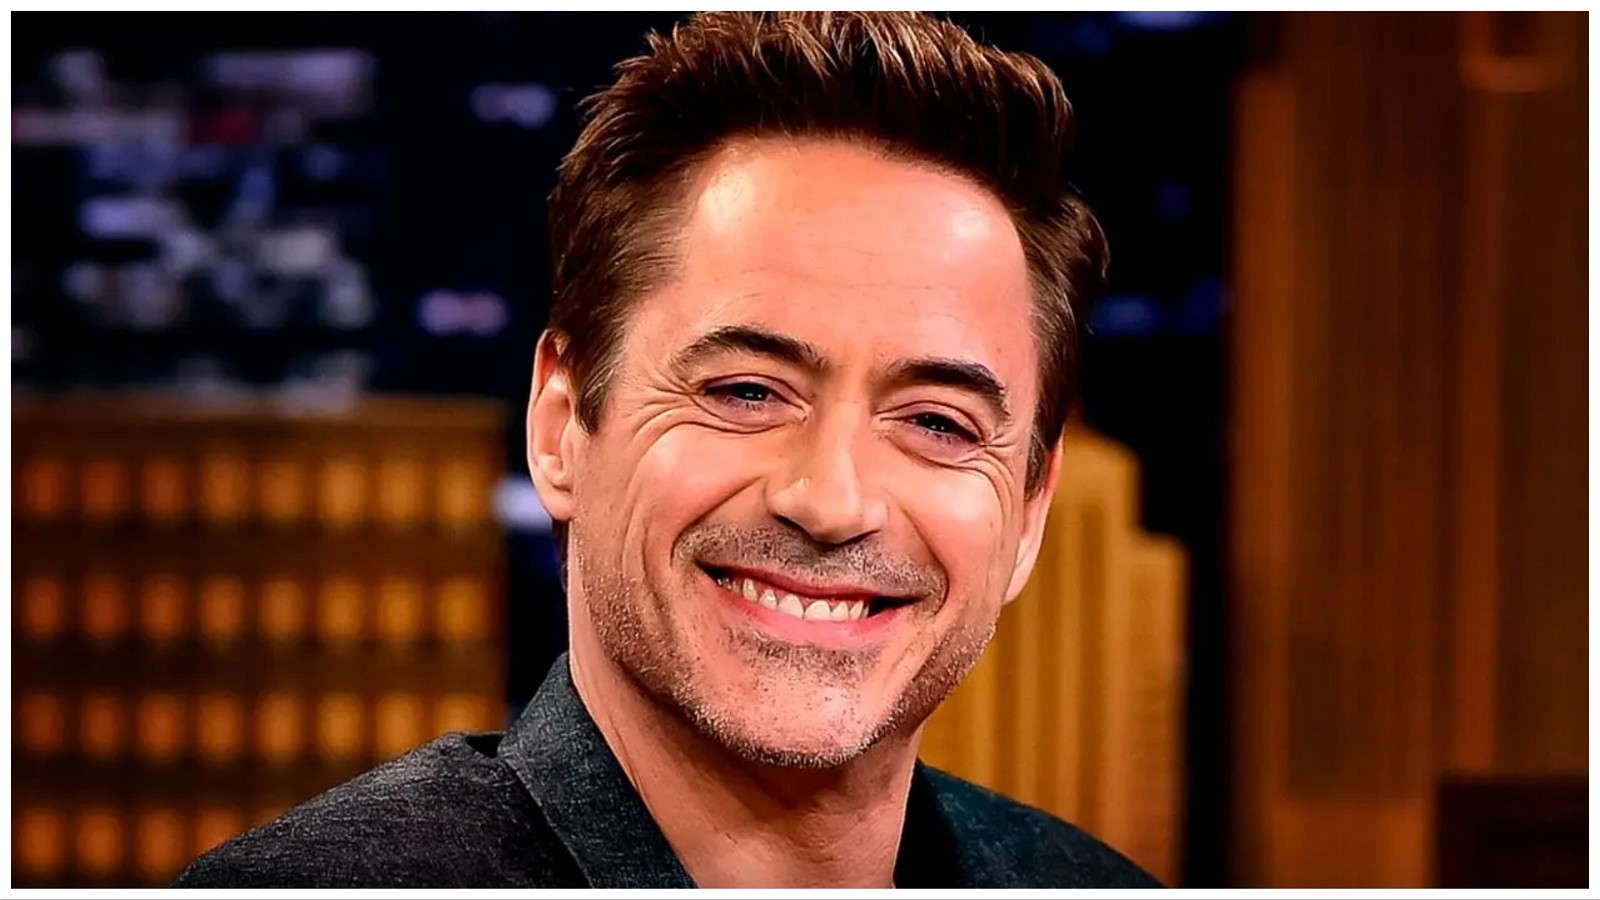 Robert Downey Jr is best known for playing Iron Man